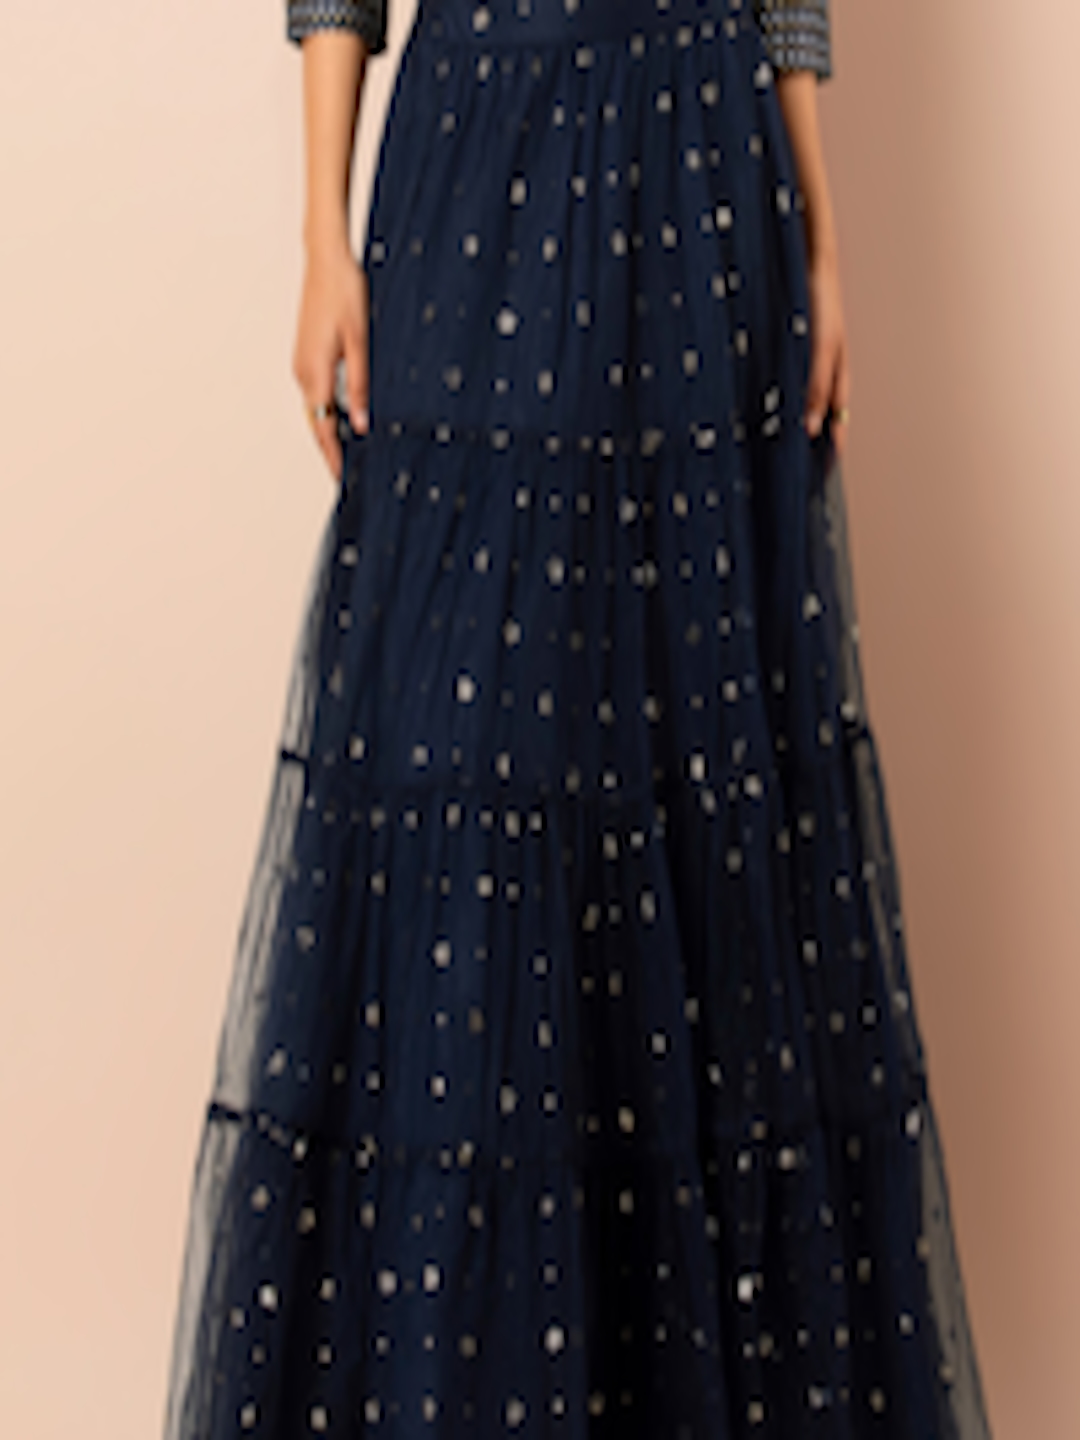 buy-indya-navy-blue-embroidered-tiered-maxi-skirt-skirts-for-women